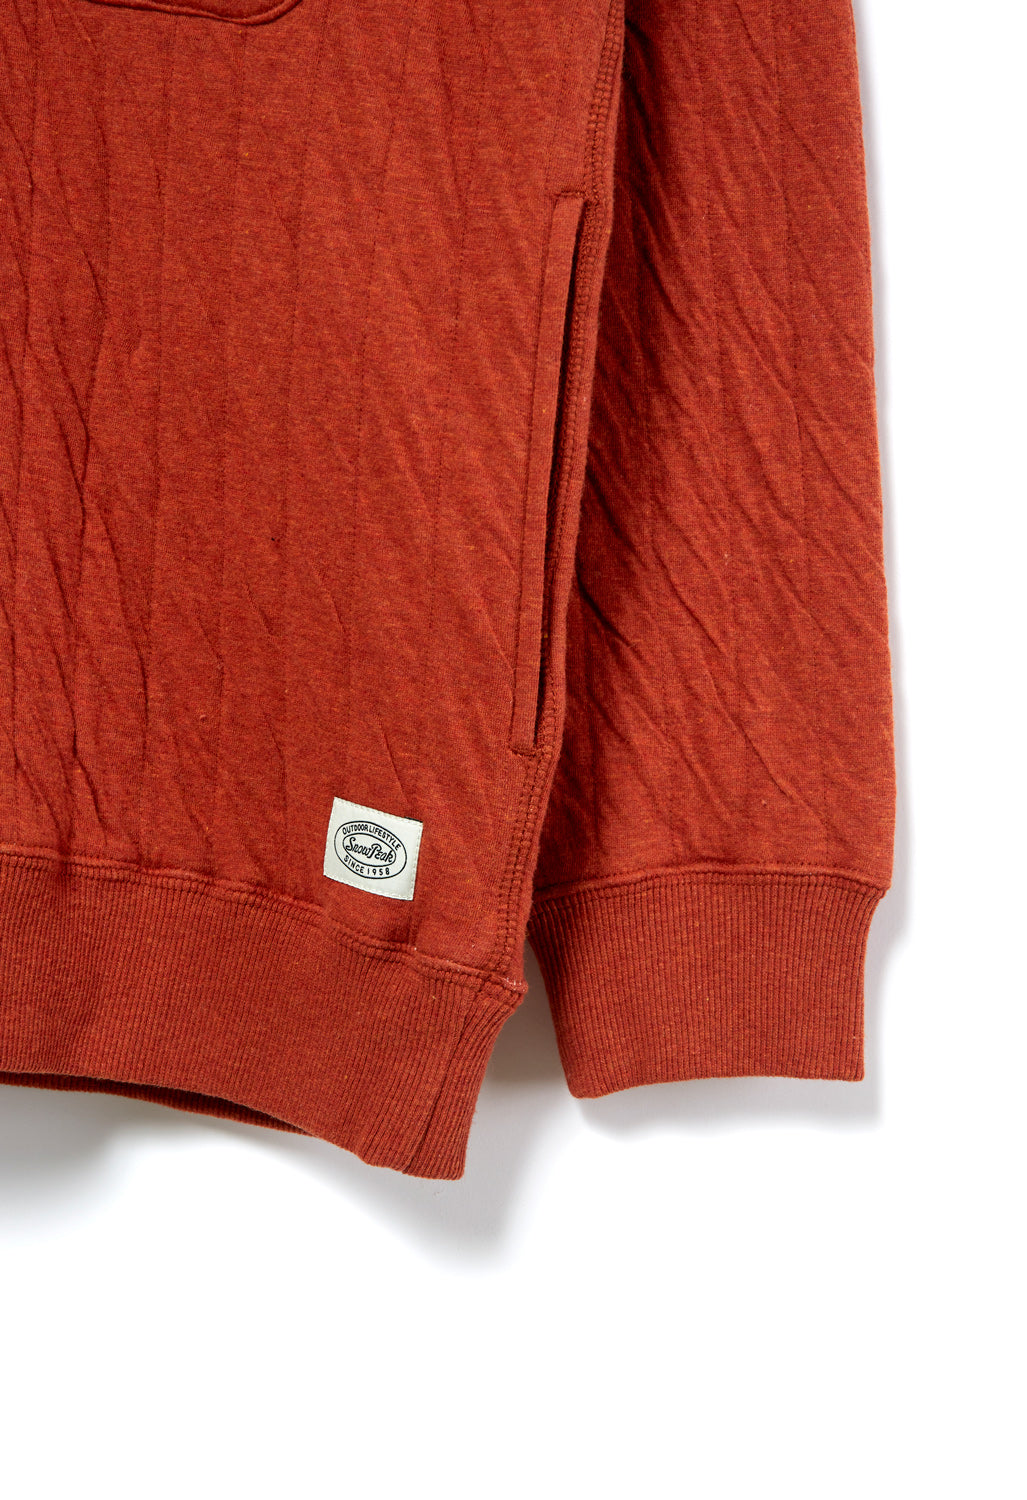 Snow Peak Natural Warm Stretch Pullover - Orange – Outsiders Store UK